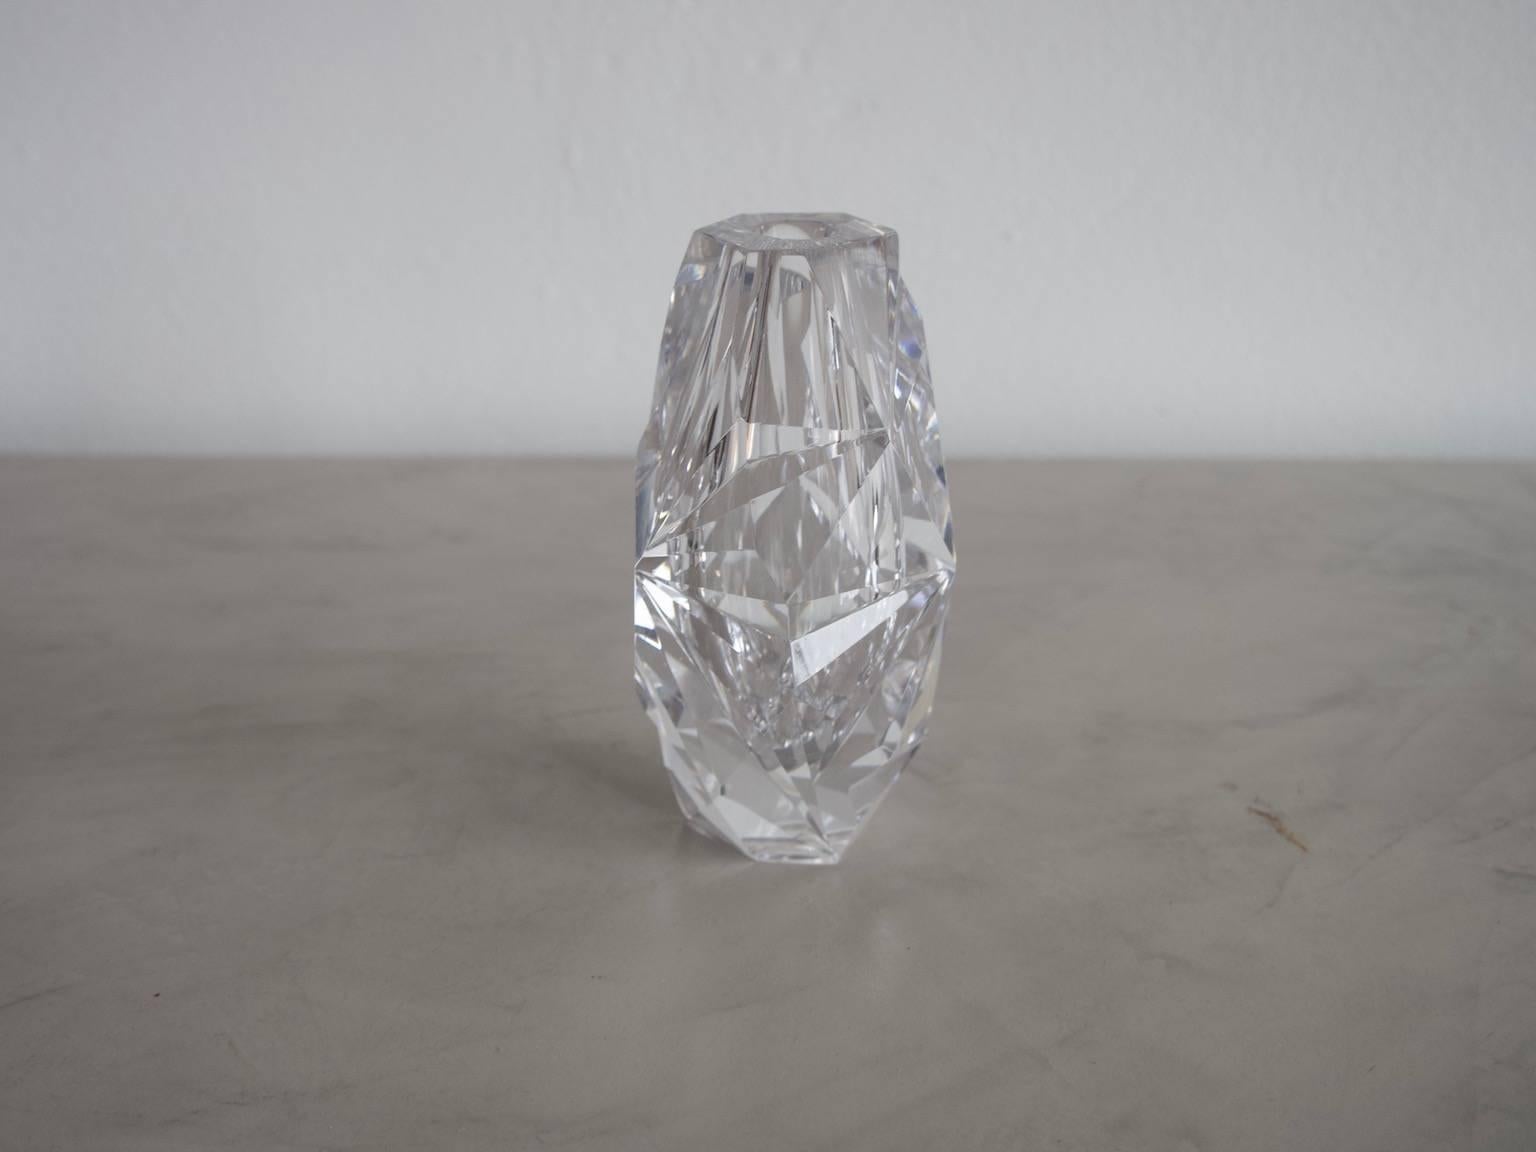 Colorless glass vase with cut decoration designed by Vicke Lindstrand and manufactured by Kosta, Sweden. Ovoid shape. Engraved on the bottom: Kosta 42769 Lindstrand.